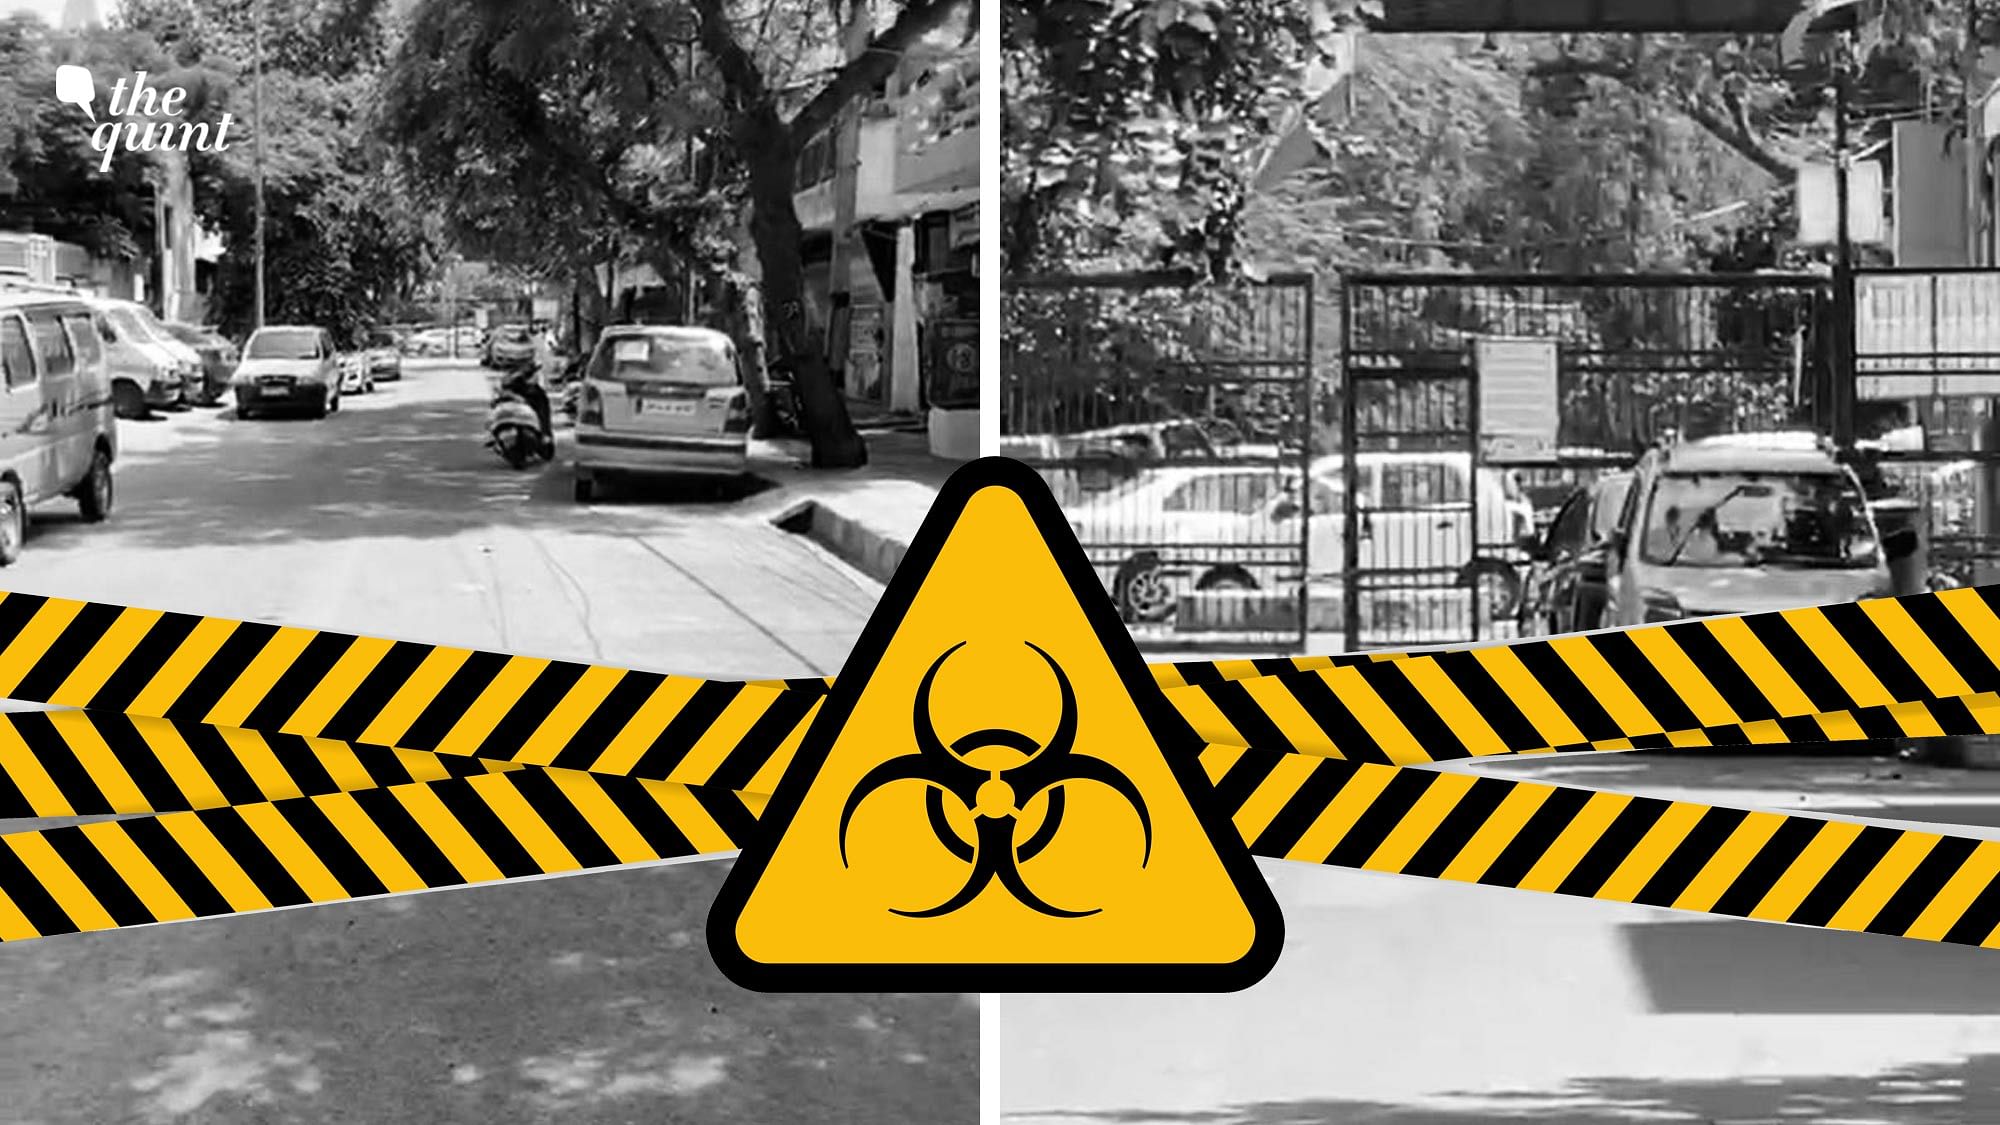 A Delhi doctor stuck in a containment zone in Delhi is not allowed to go for her duty in spite of a COVID-19 pass. Is it time to revisit containment zone guidelines? Can safety and ease of movement of locals be better balanced?